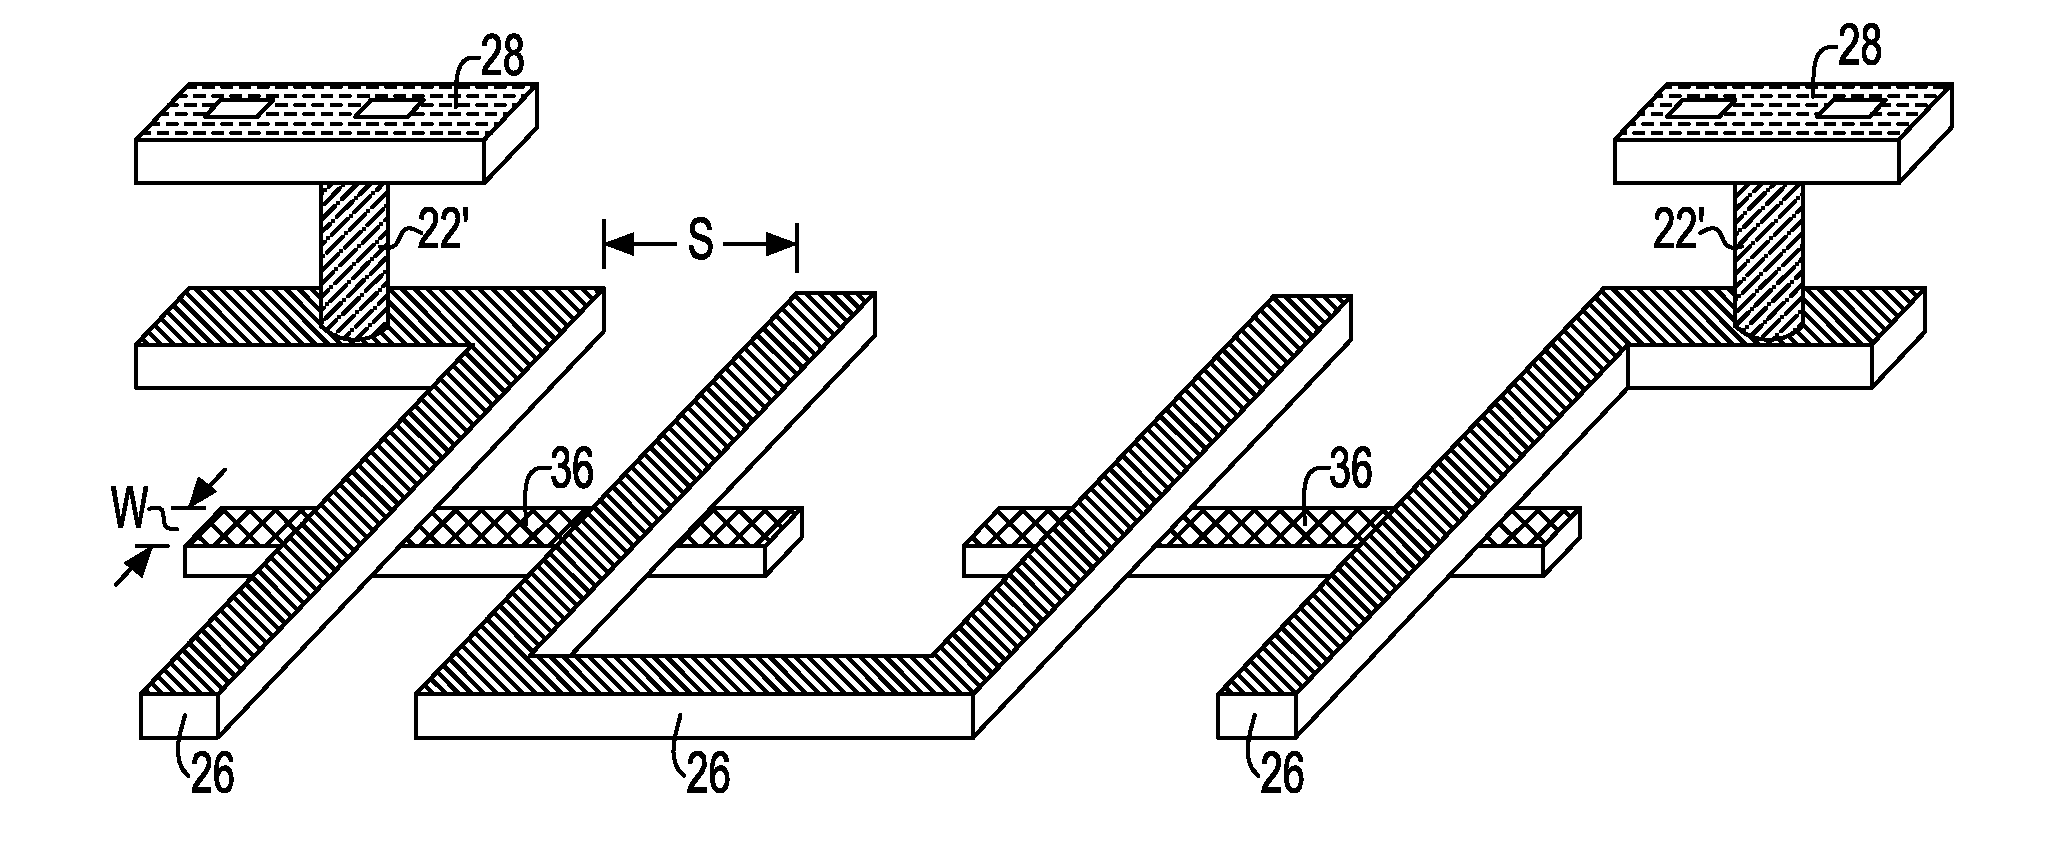 Contact Resistance Test Structure and Method Suitable for Three-Dimensional Integrated Circuits